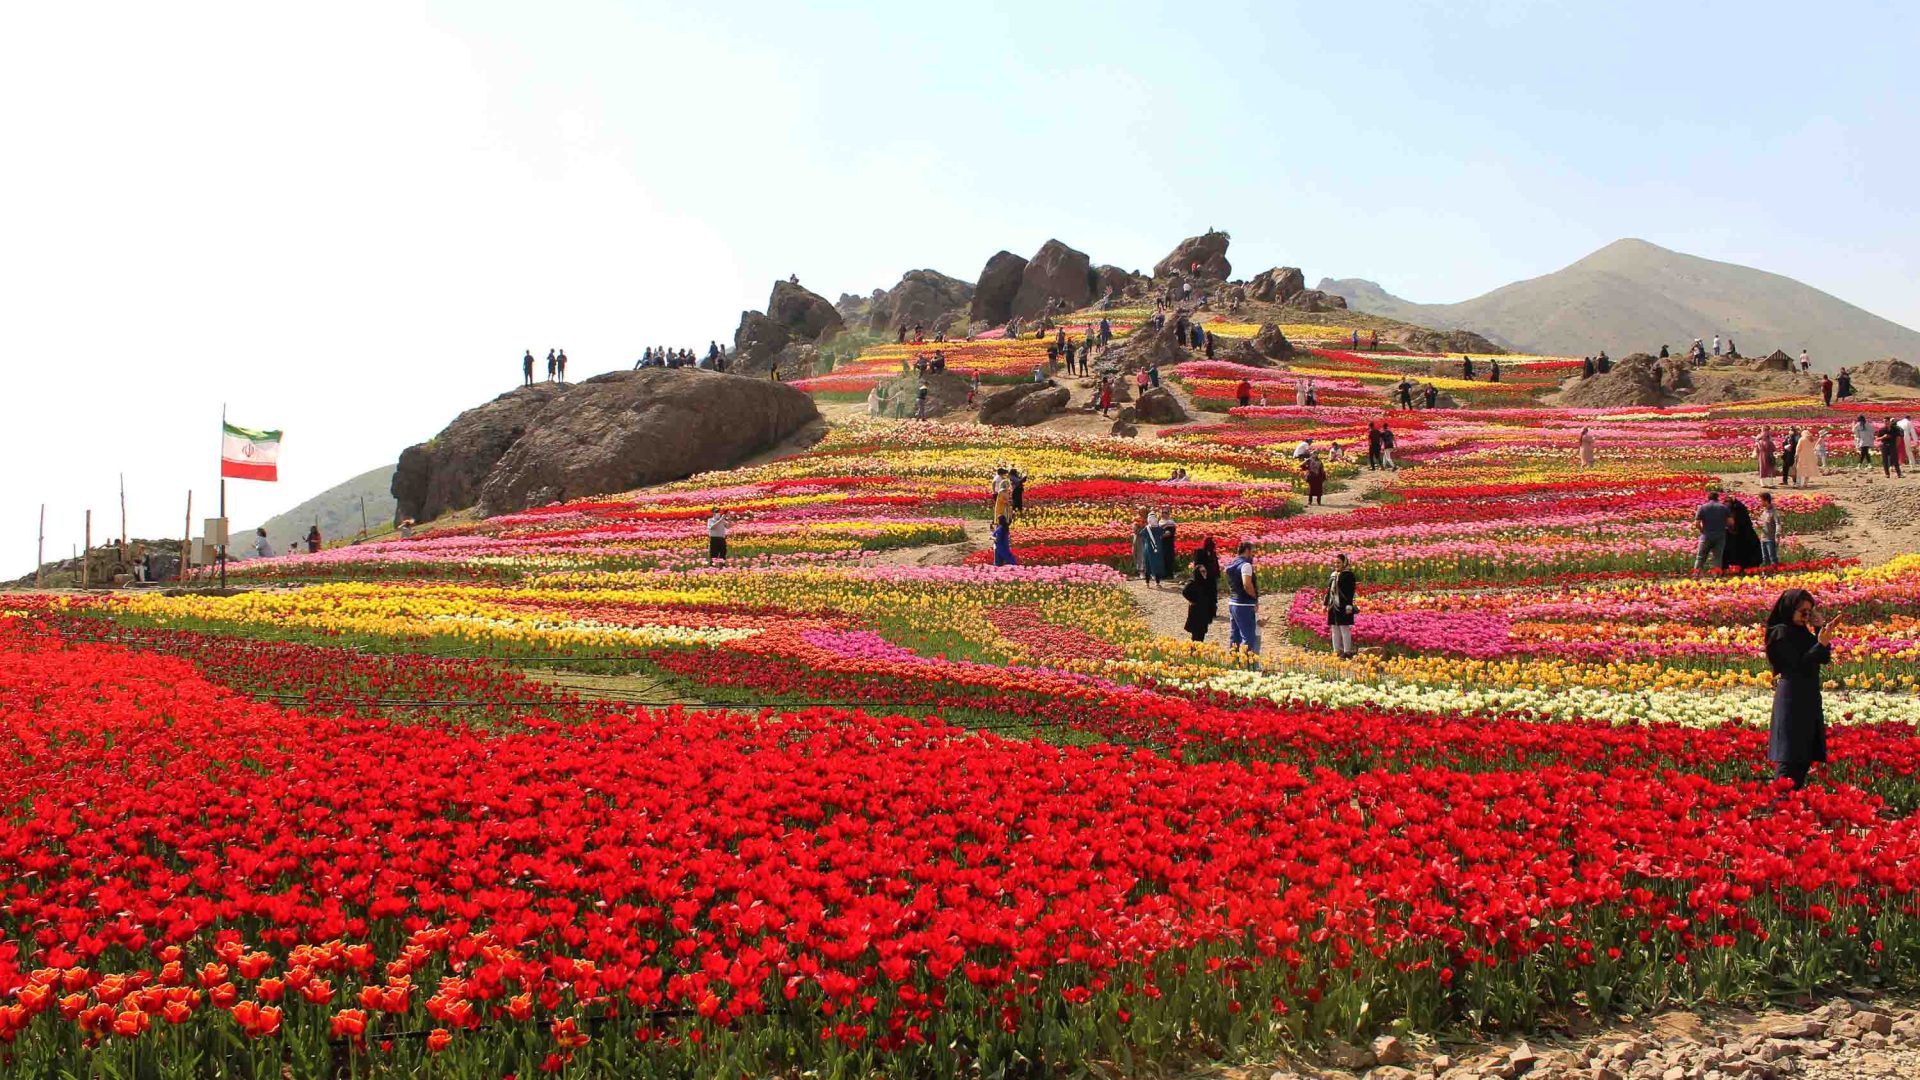 Tourists walk amongst fields of colorful flowers and rock formations.